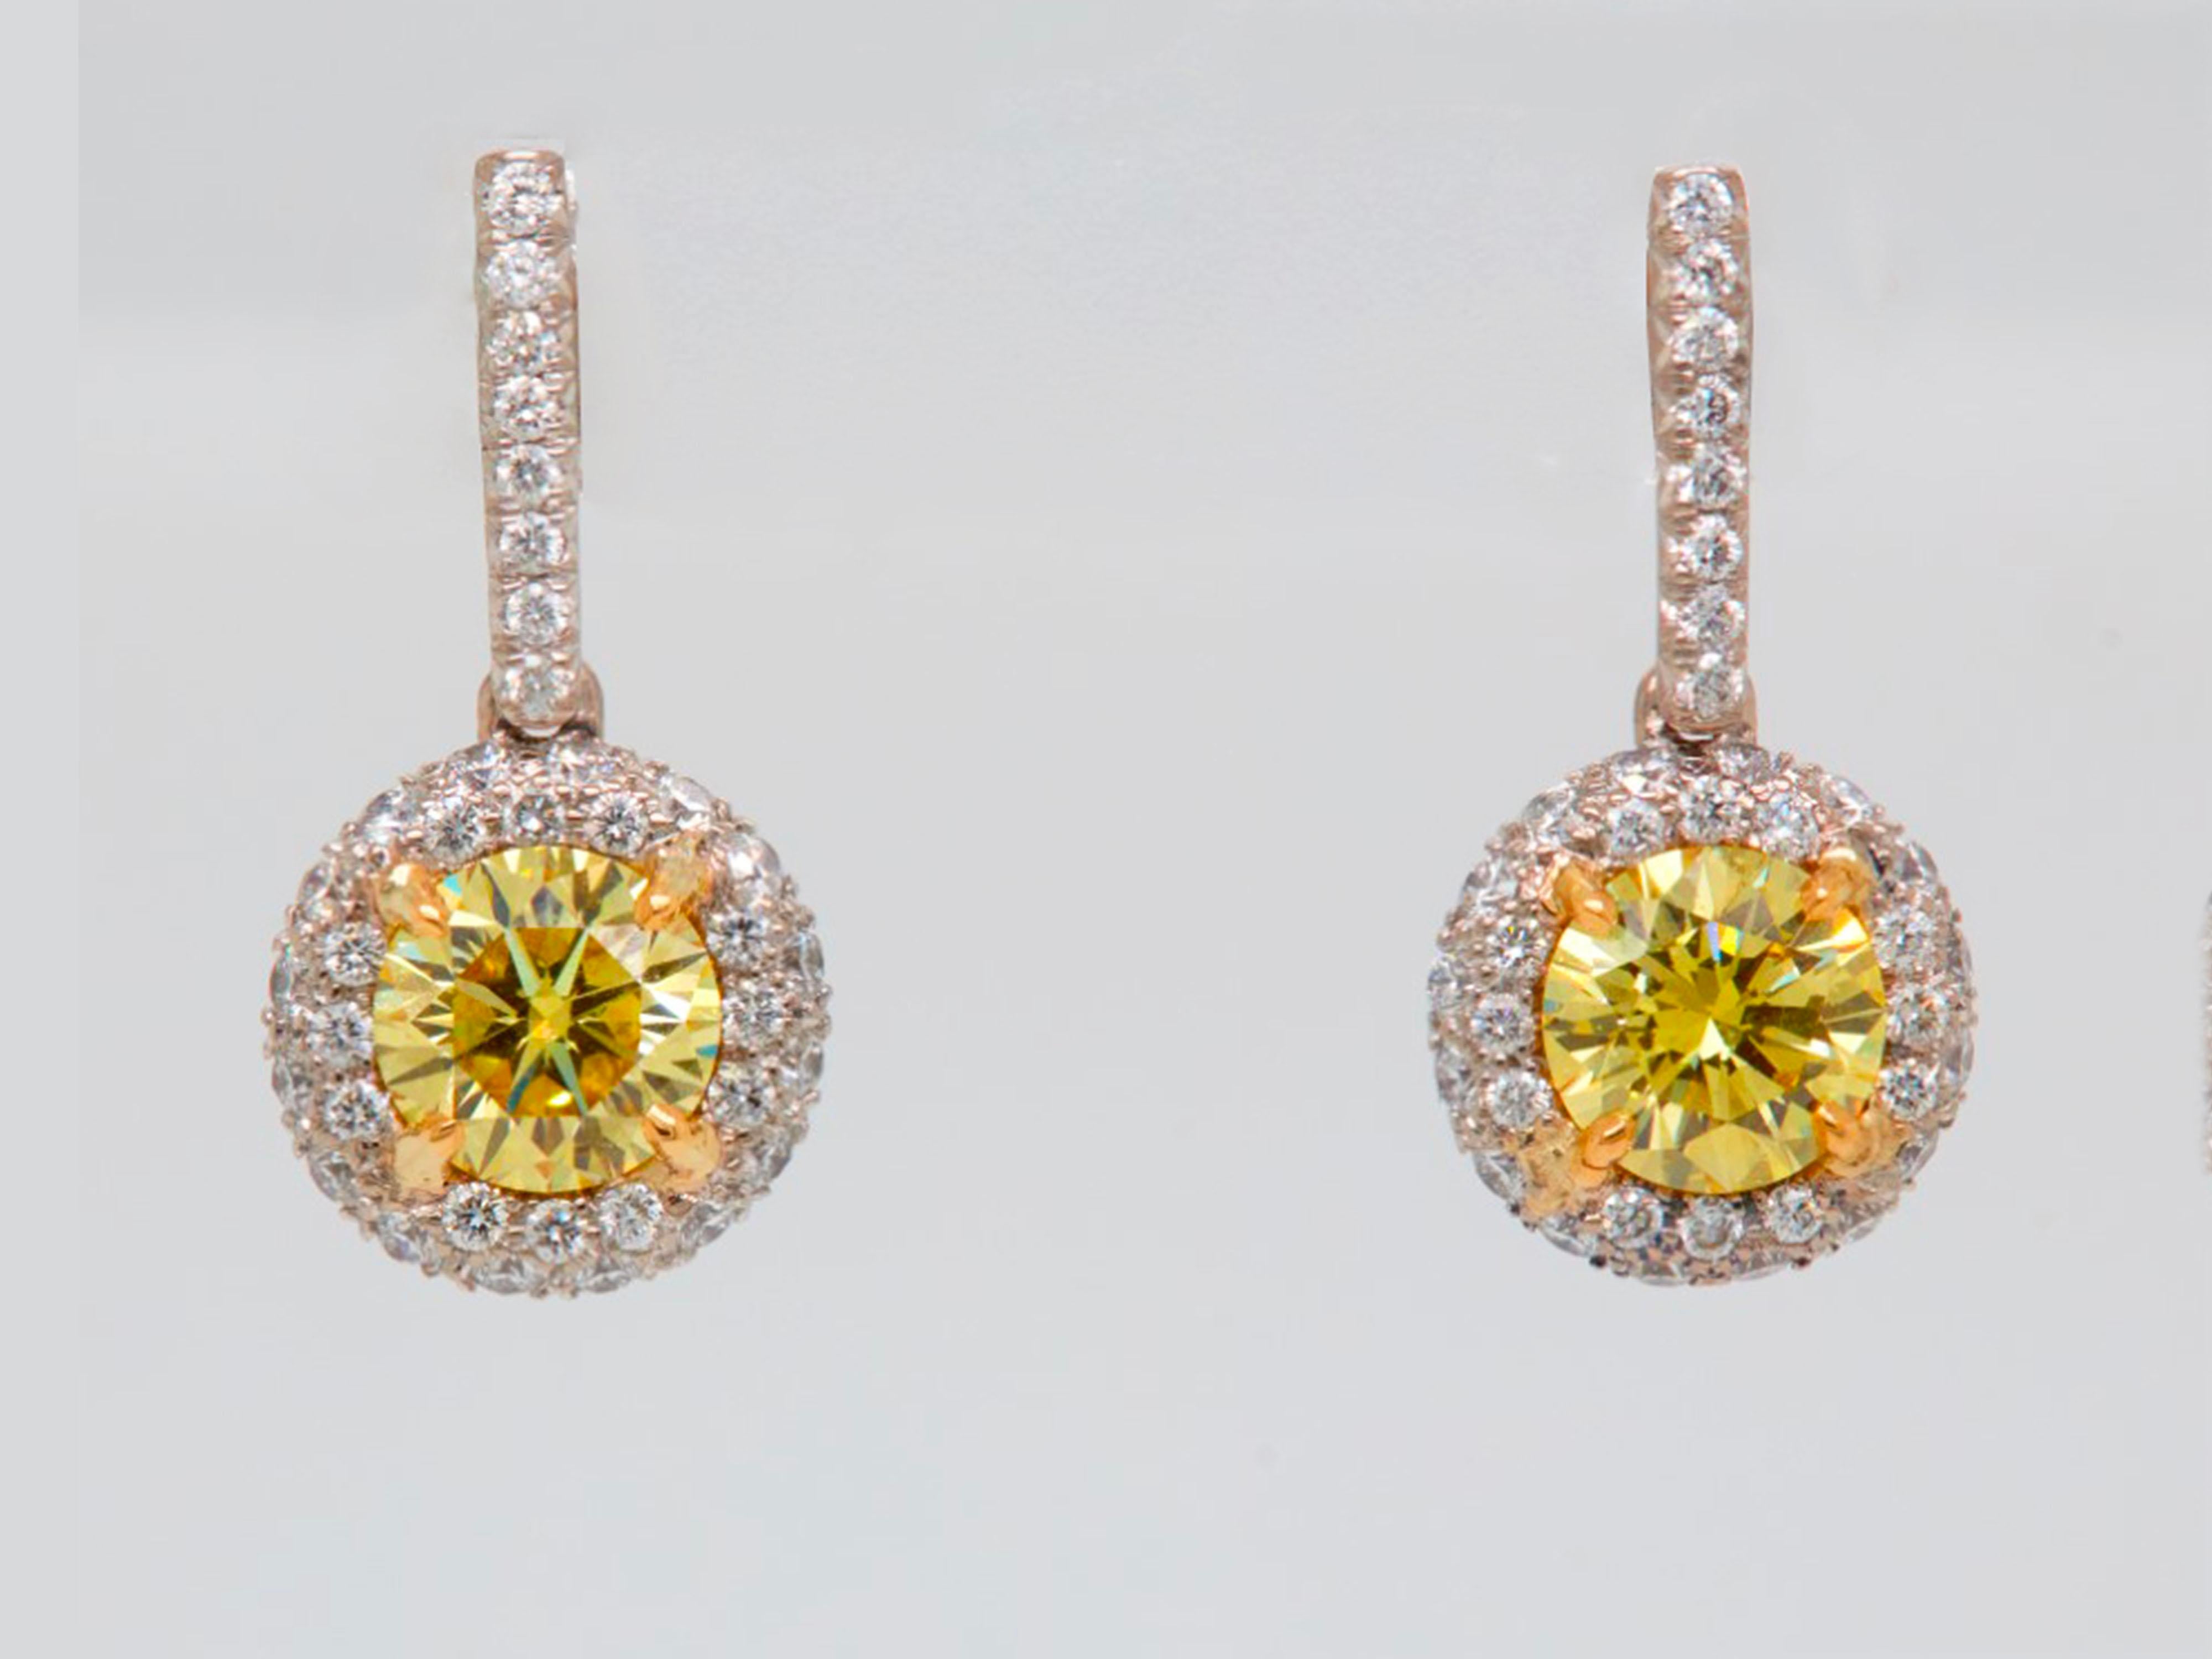 Novel Collection showcasing a stunning pair of 2.09 carat round brilliant diamond with halo drop earrings, GIA certified as VS+ clarity and J color.
Set with a perfect match of Fancy Vivid Yellow round brilliant cut 1.04 carat, VS1 clarity, GIA